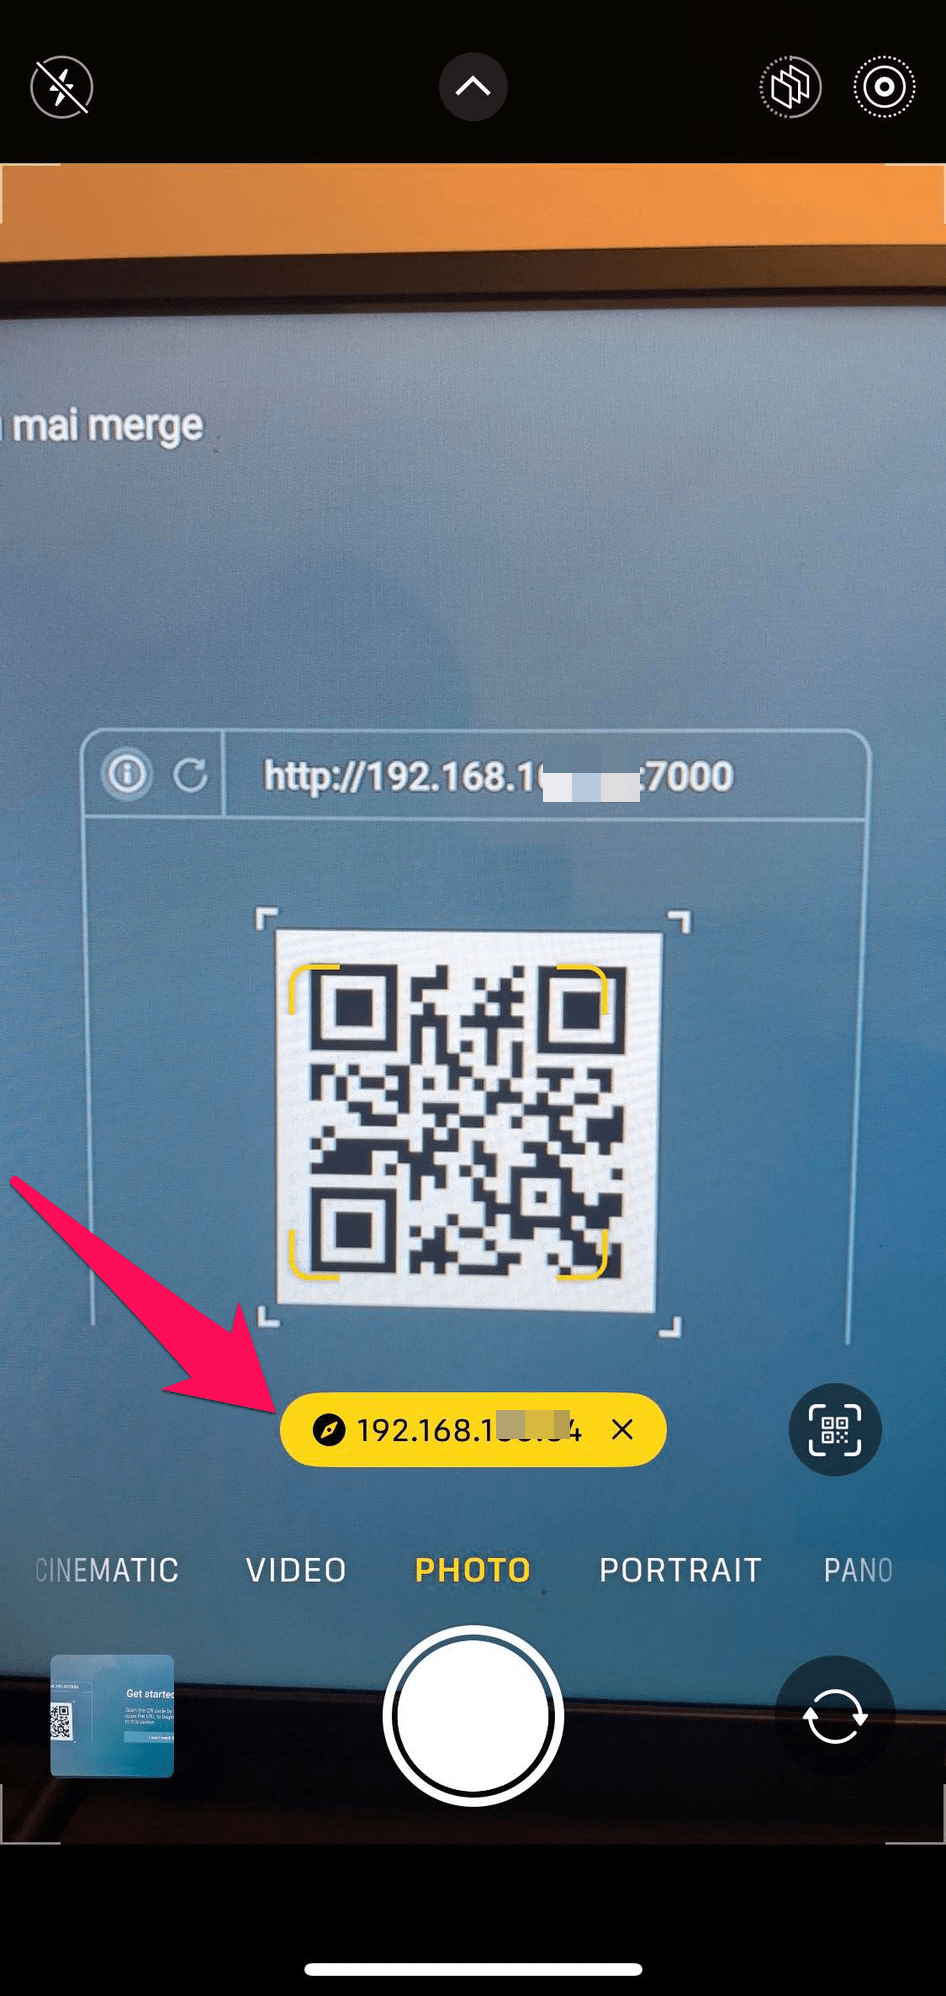 Use iPhone camera to scan QR code in AirScreen